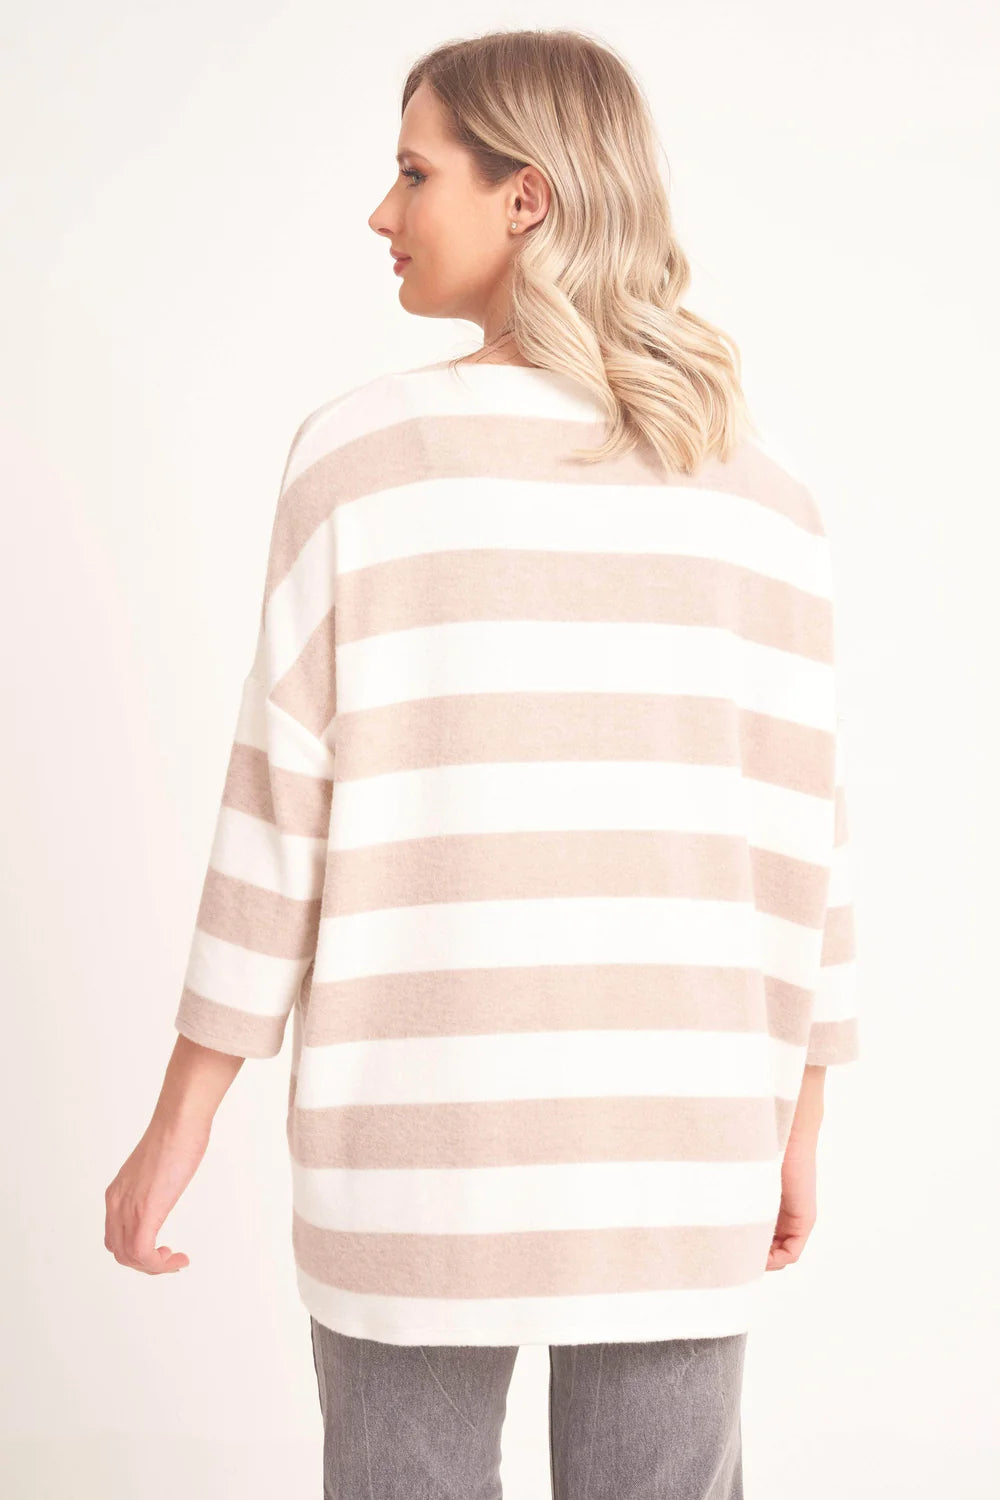 Saloos Soft Touch Stripy Tunic